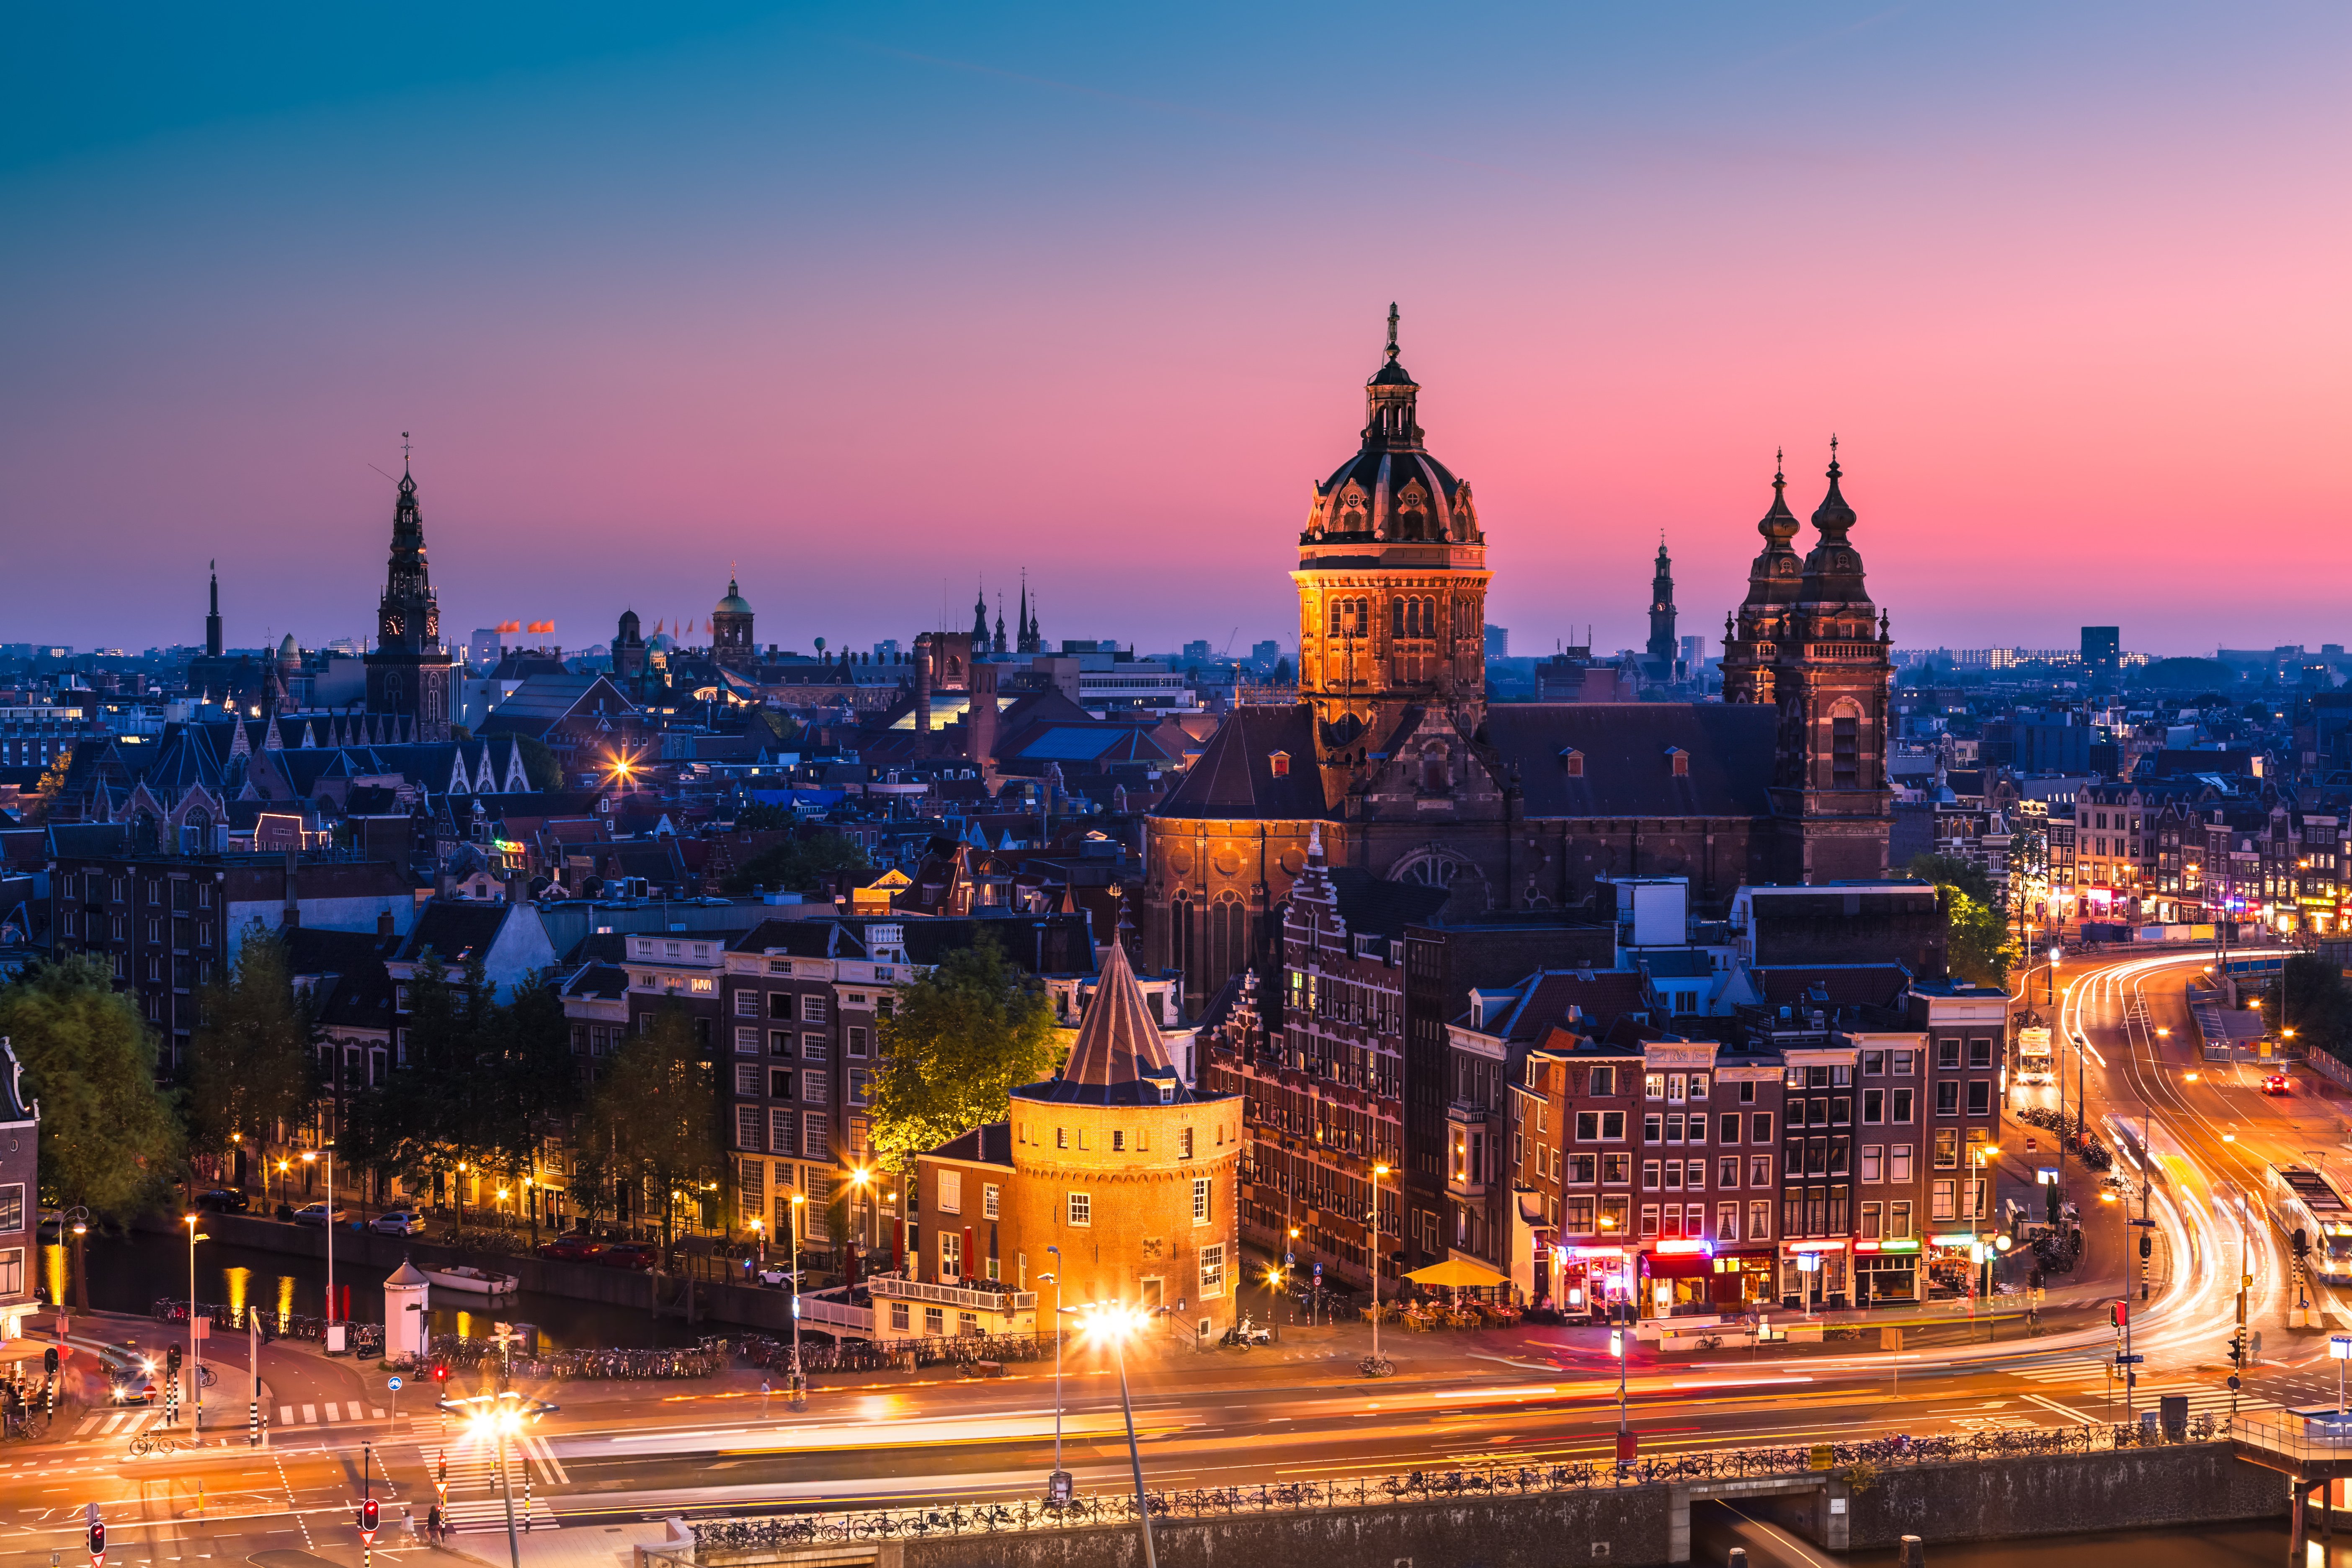 amsterdam, Nederland, Amsterdam, Netherlands, City, Night, Sunset, Home, Church, Cathedral, Buildings, Roofs, Roads, Cars, Street, Lights, Exposure Wallpaper